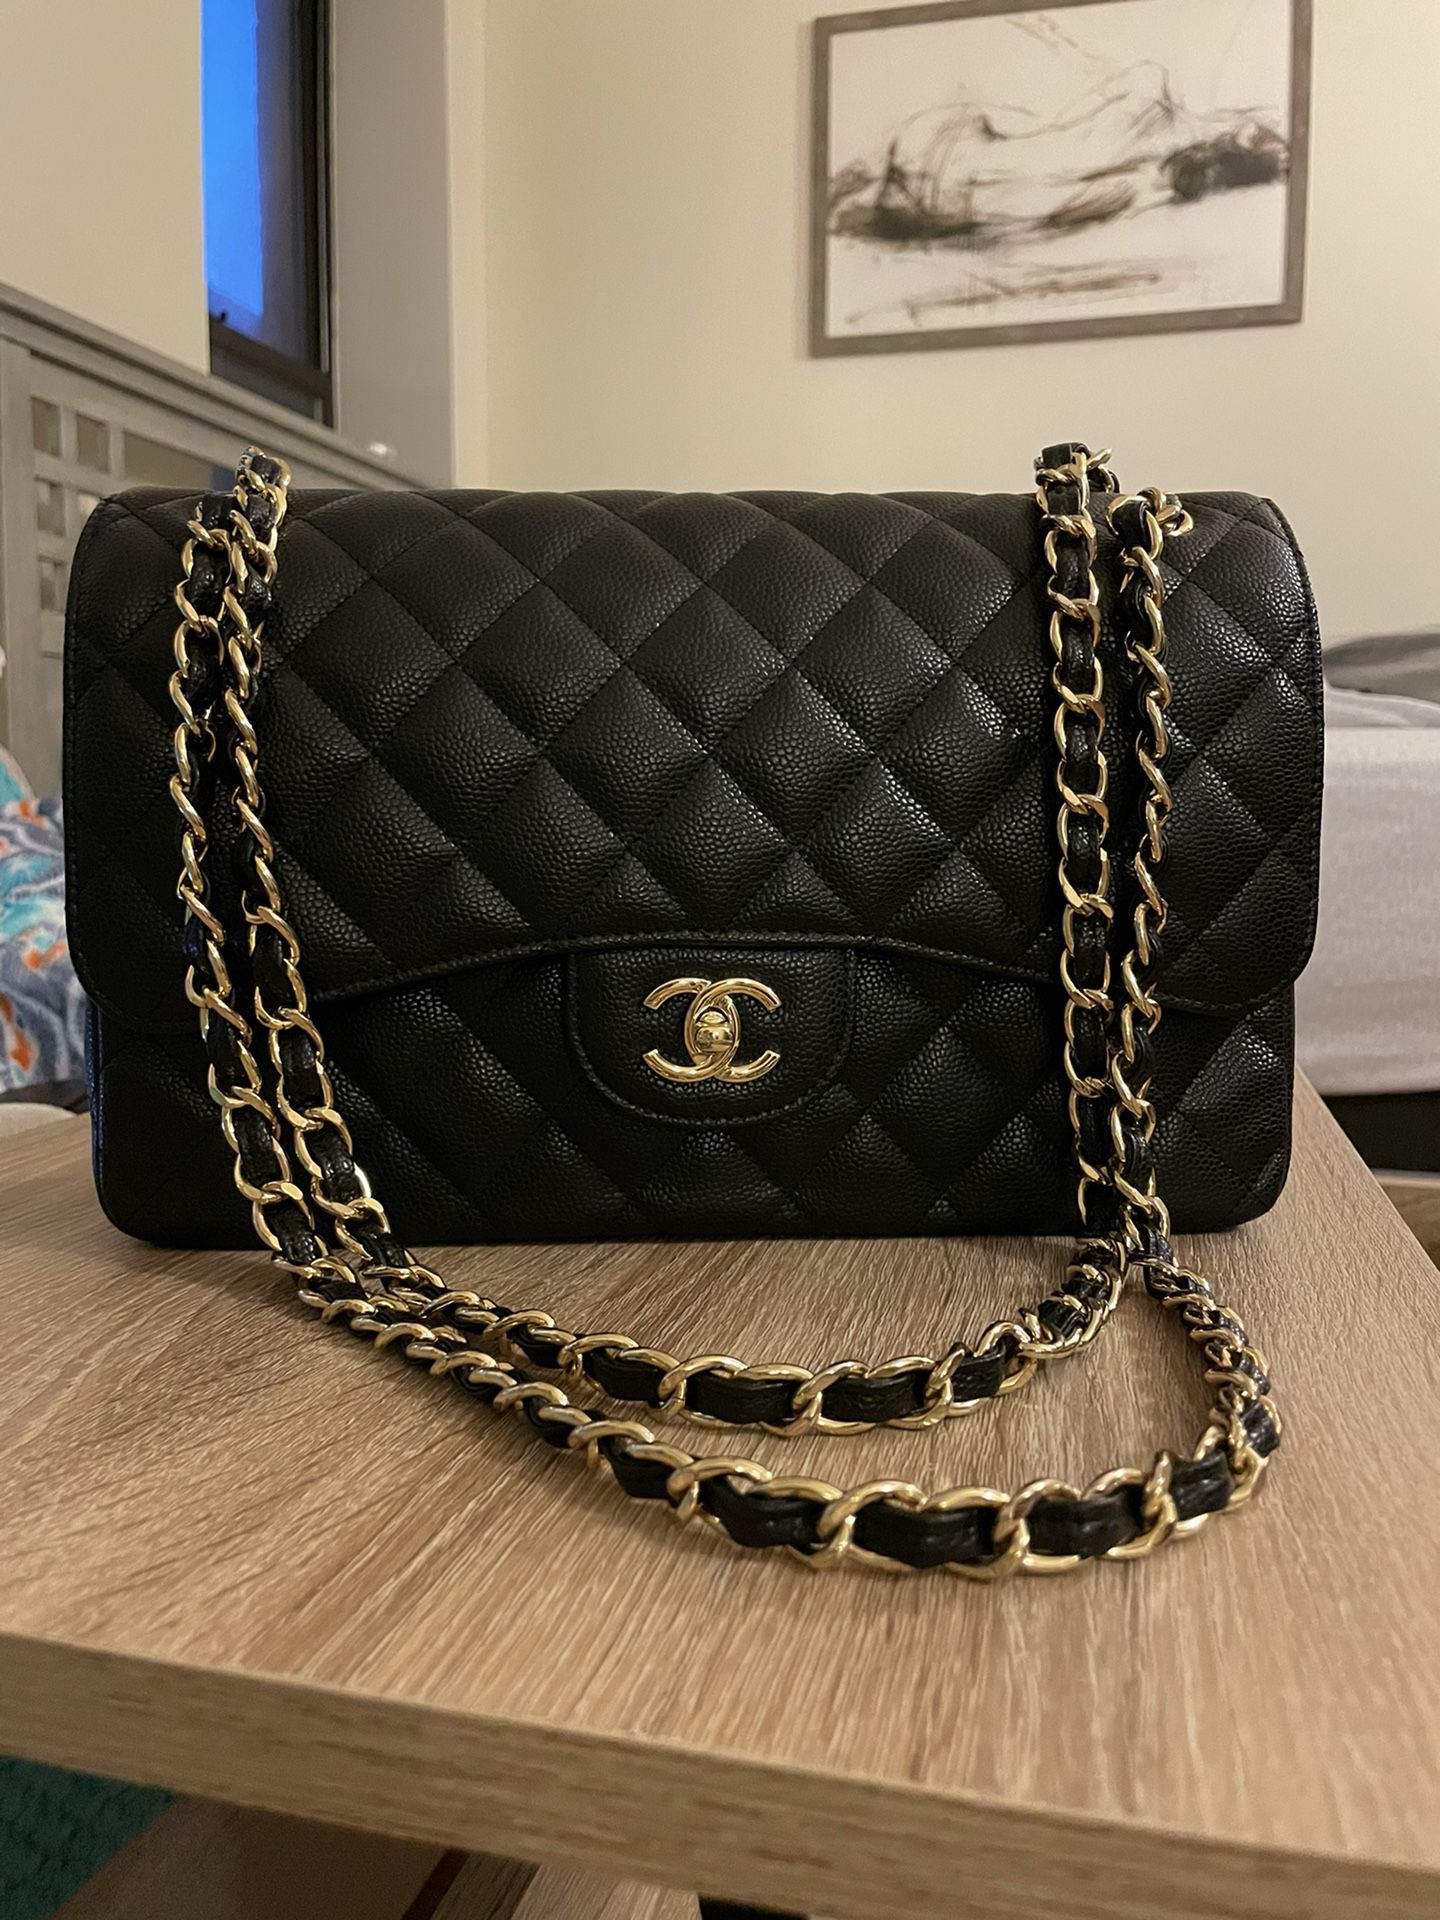 Chanel Classic flap Bag for Sale in New York, NY - OfferUp